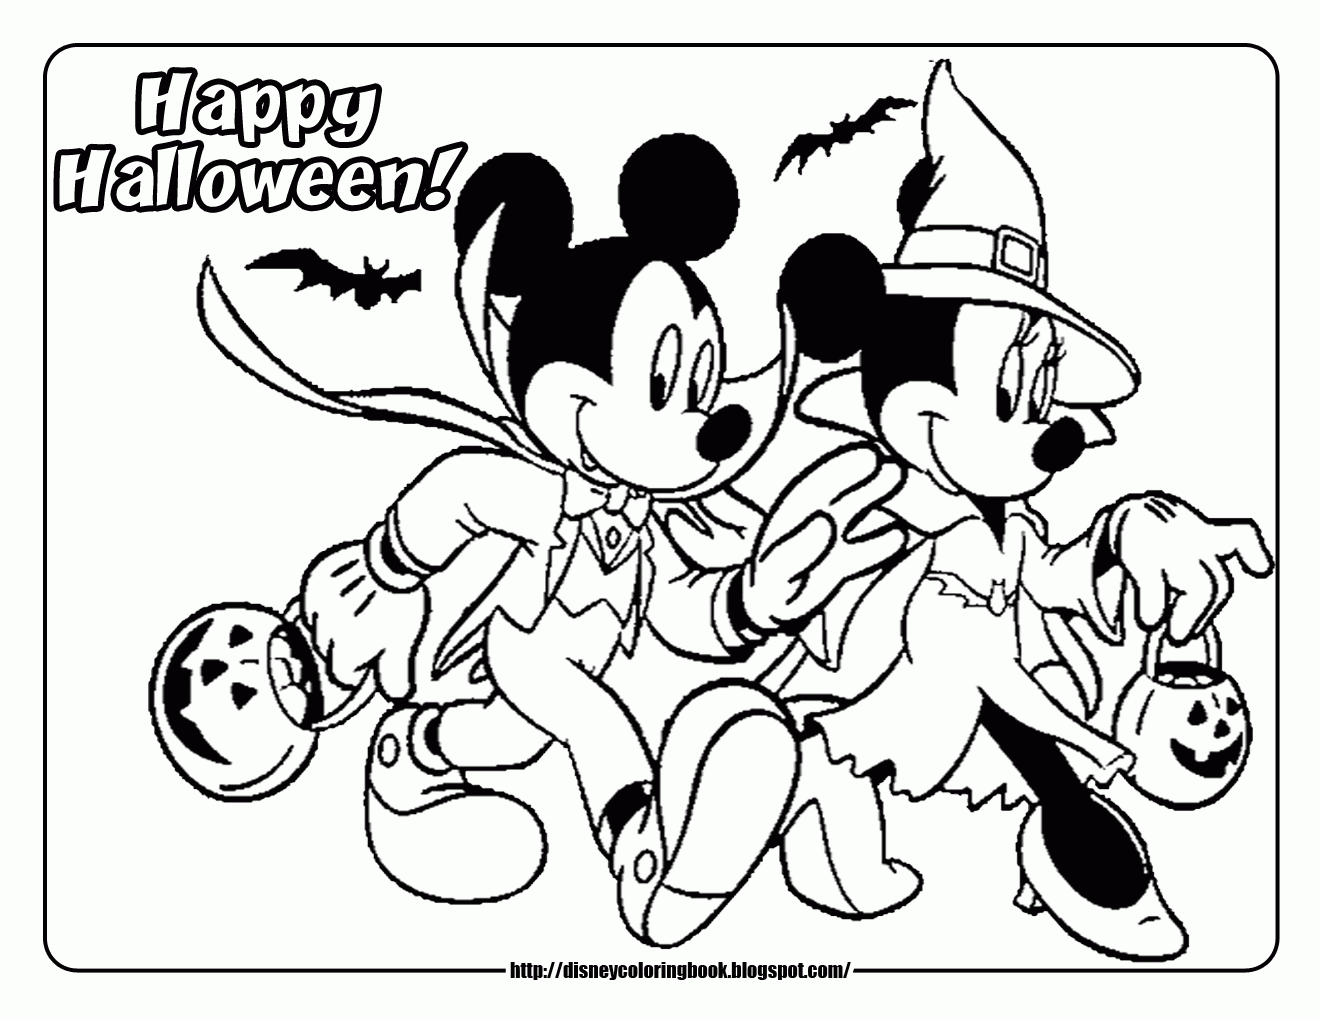 Coloring Pages Printable Minnie Mouse Halloween Hagio - Colorine ...